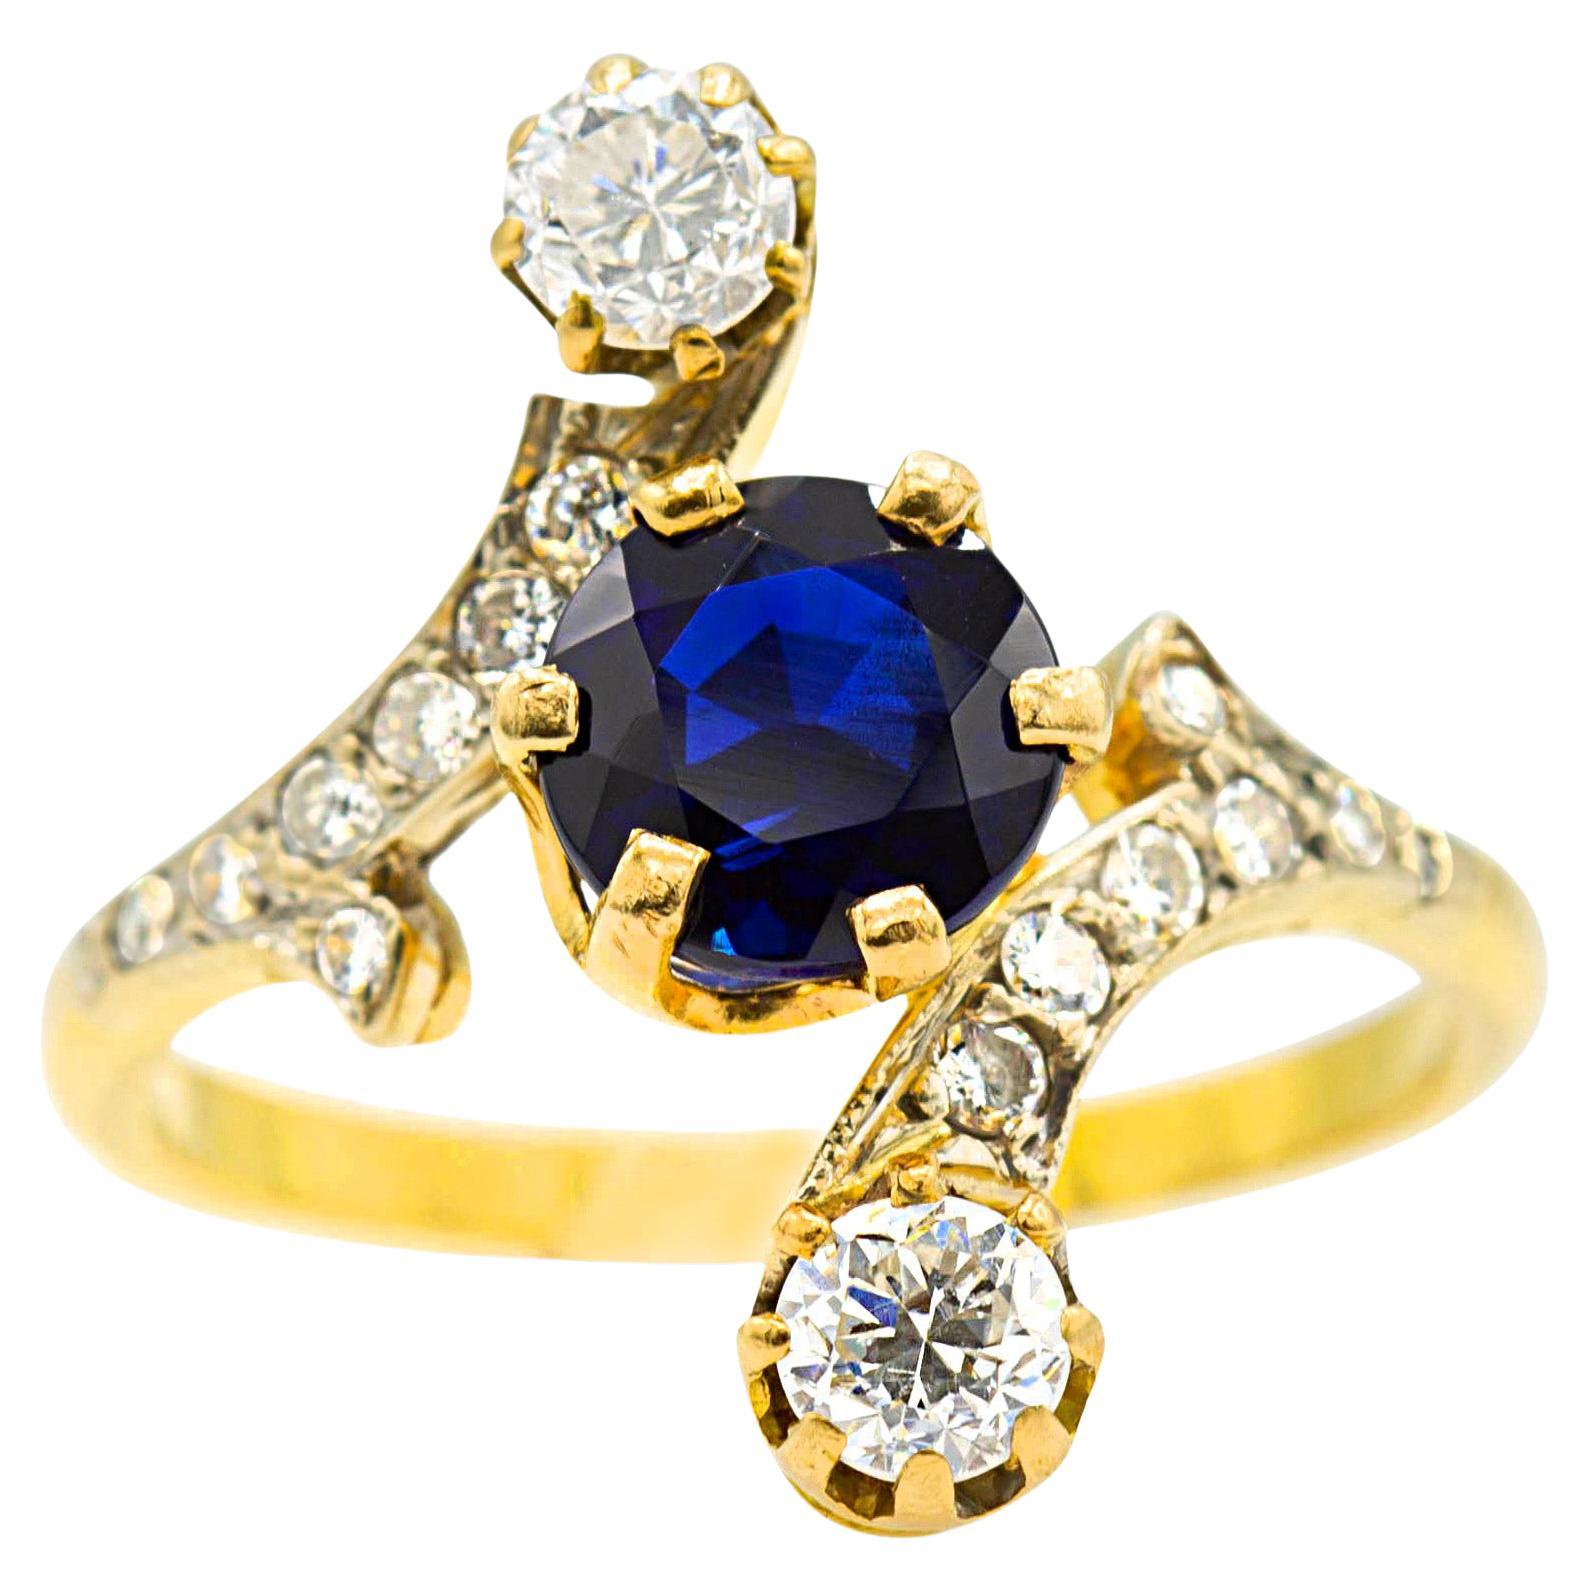 Belle Epoque 1.36 Ct. Natural Unheated Sapphire Ring in 18k Yellow Gold